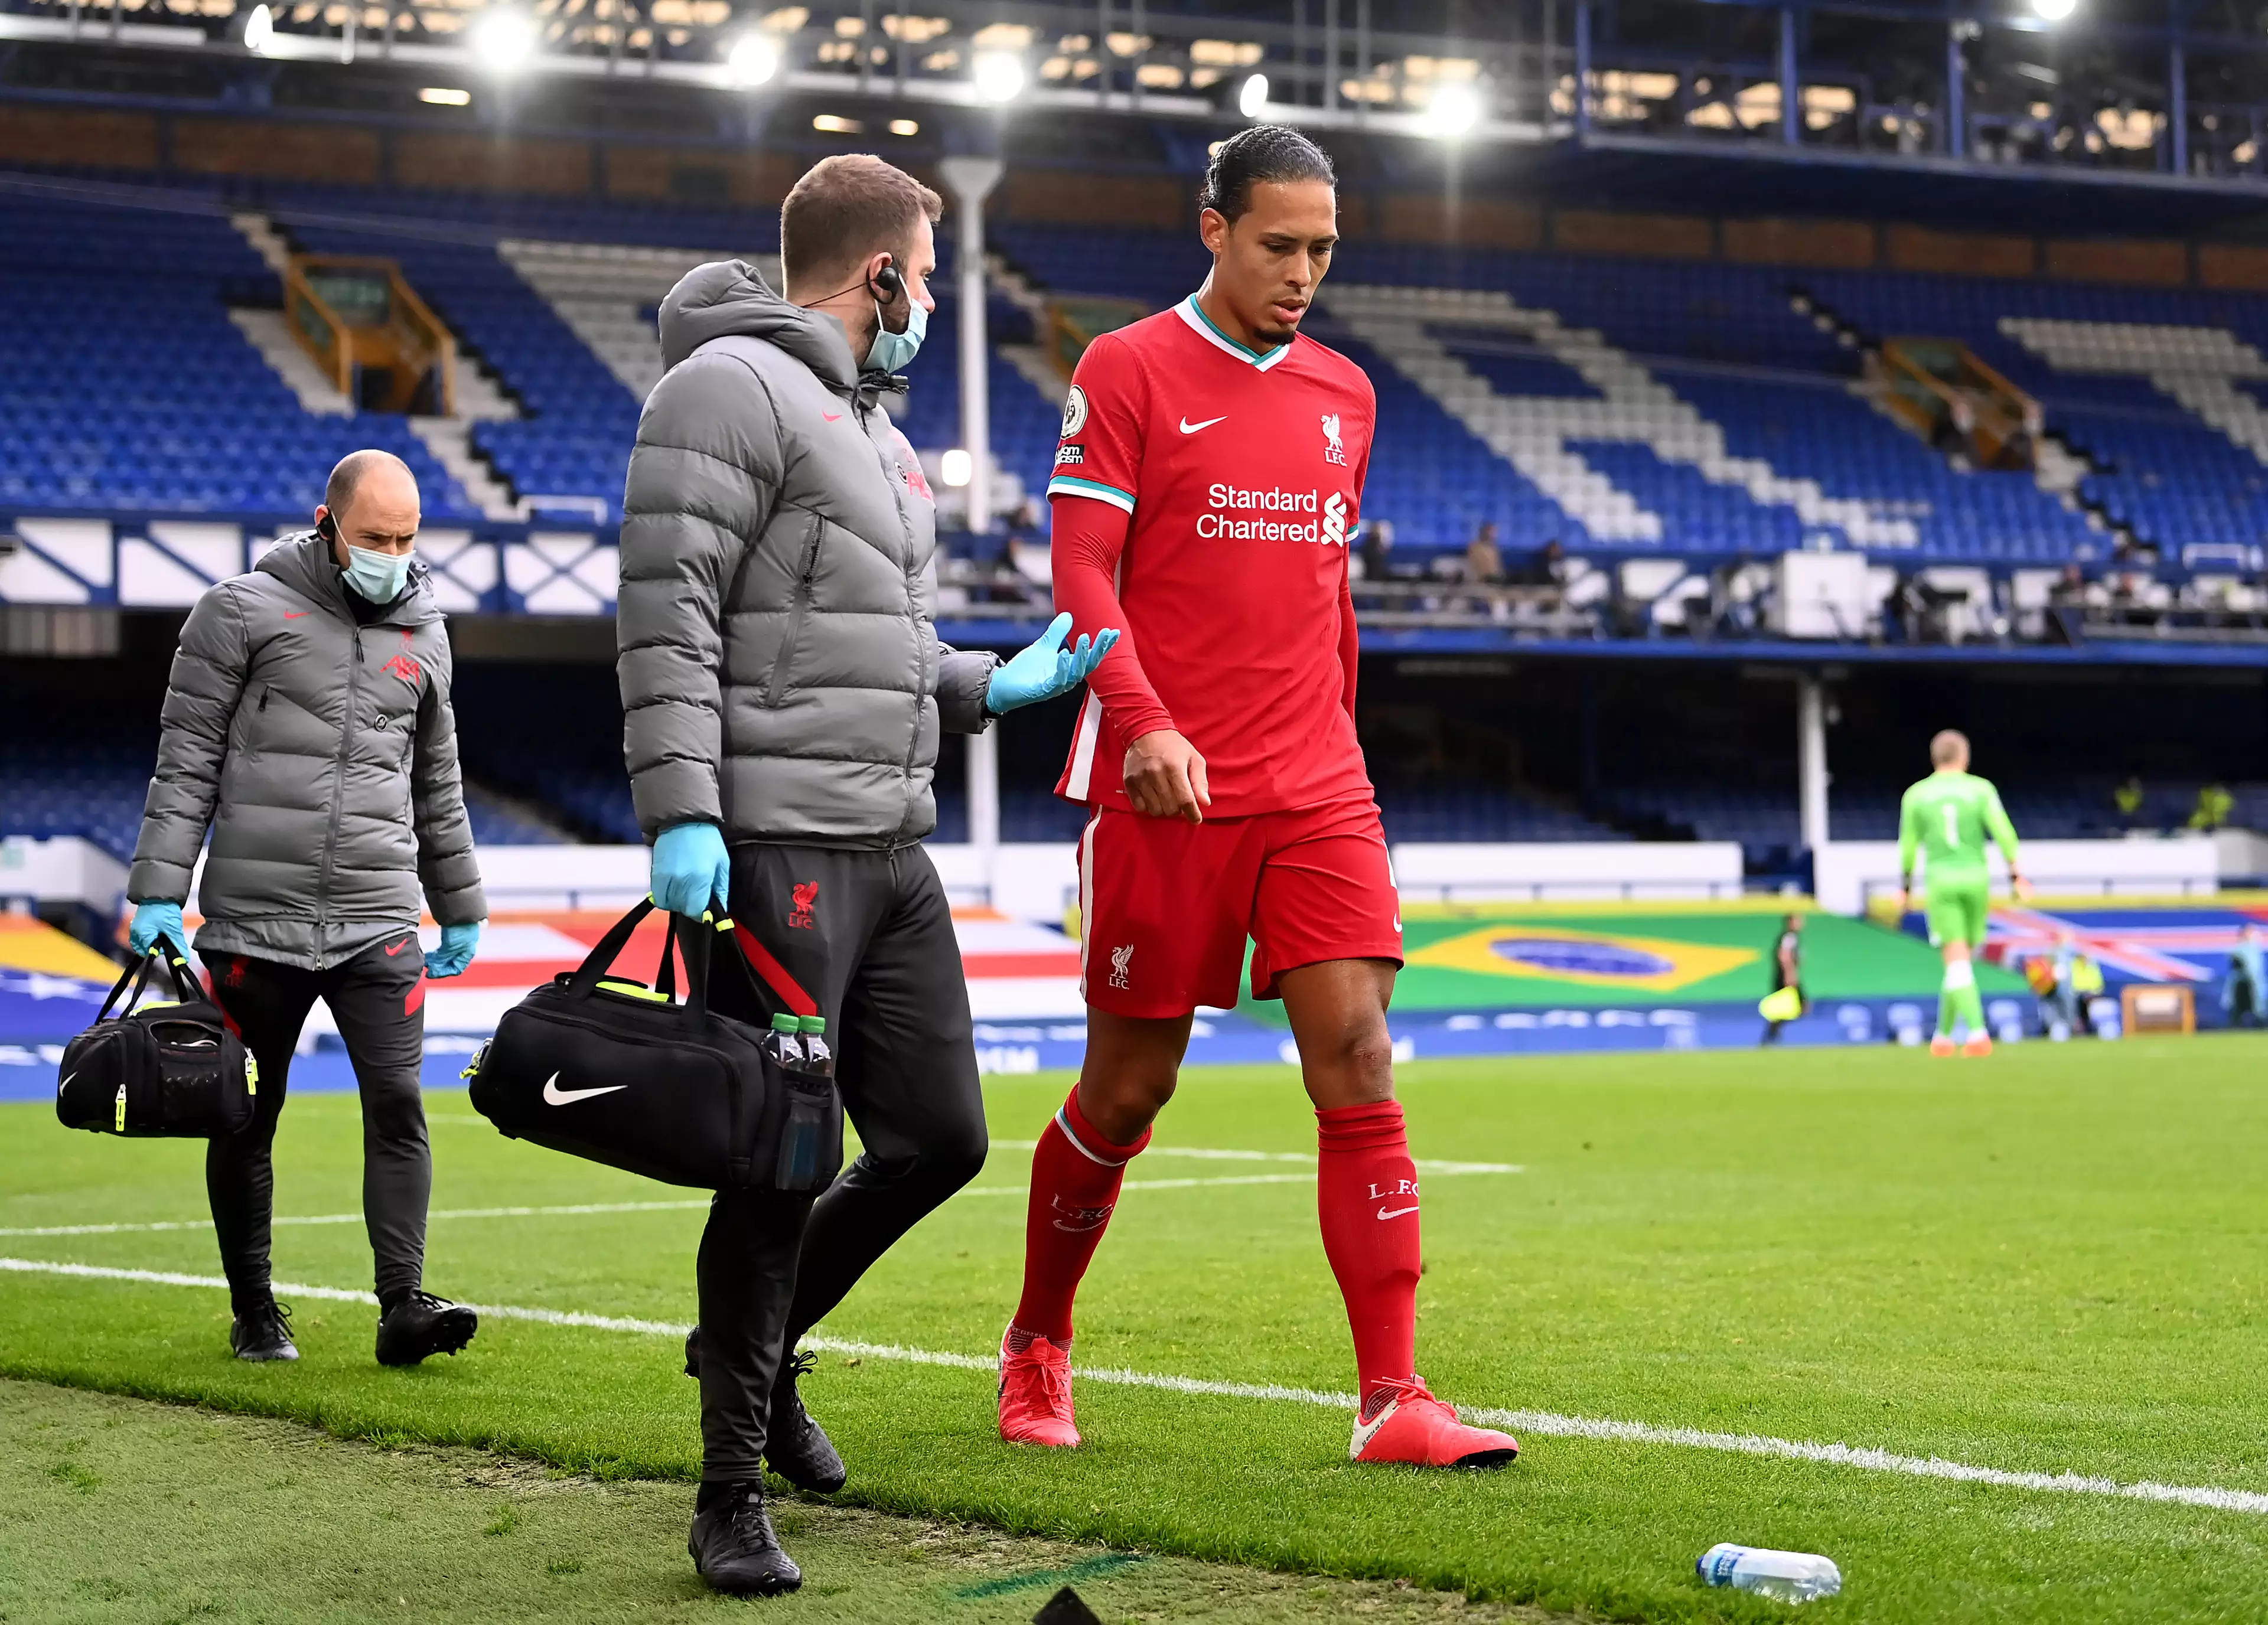 Van Dijk's injury has left Liverpool short at the back, especially with Joe Gomez also out. Image: PA Images